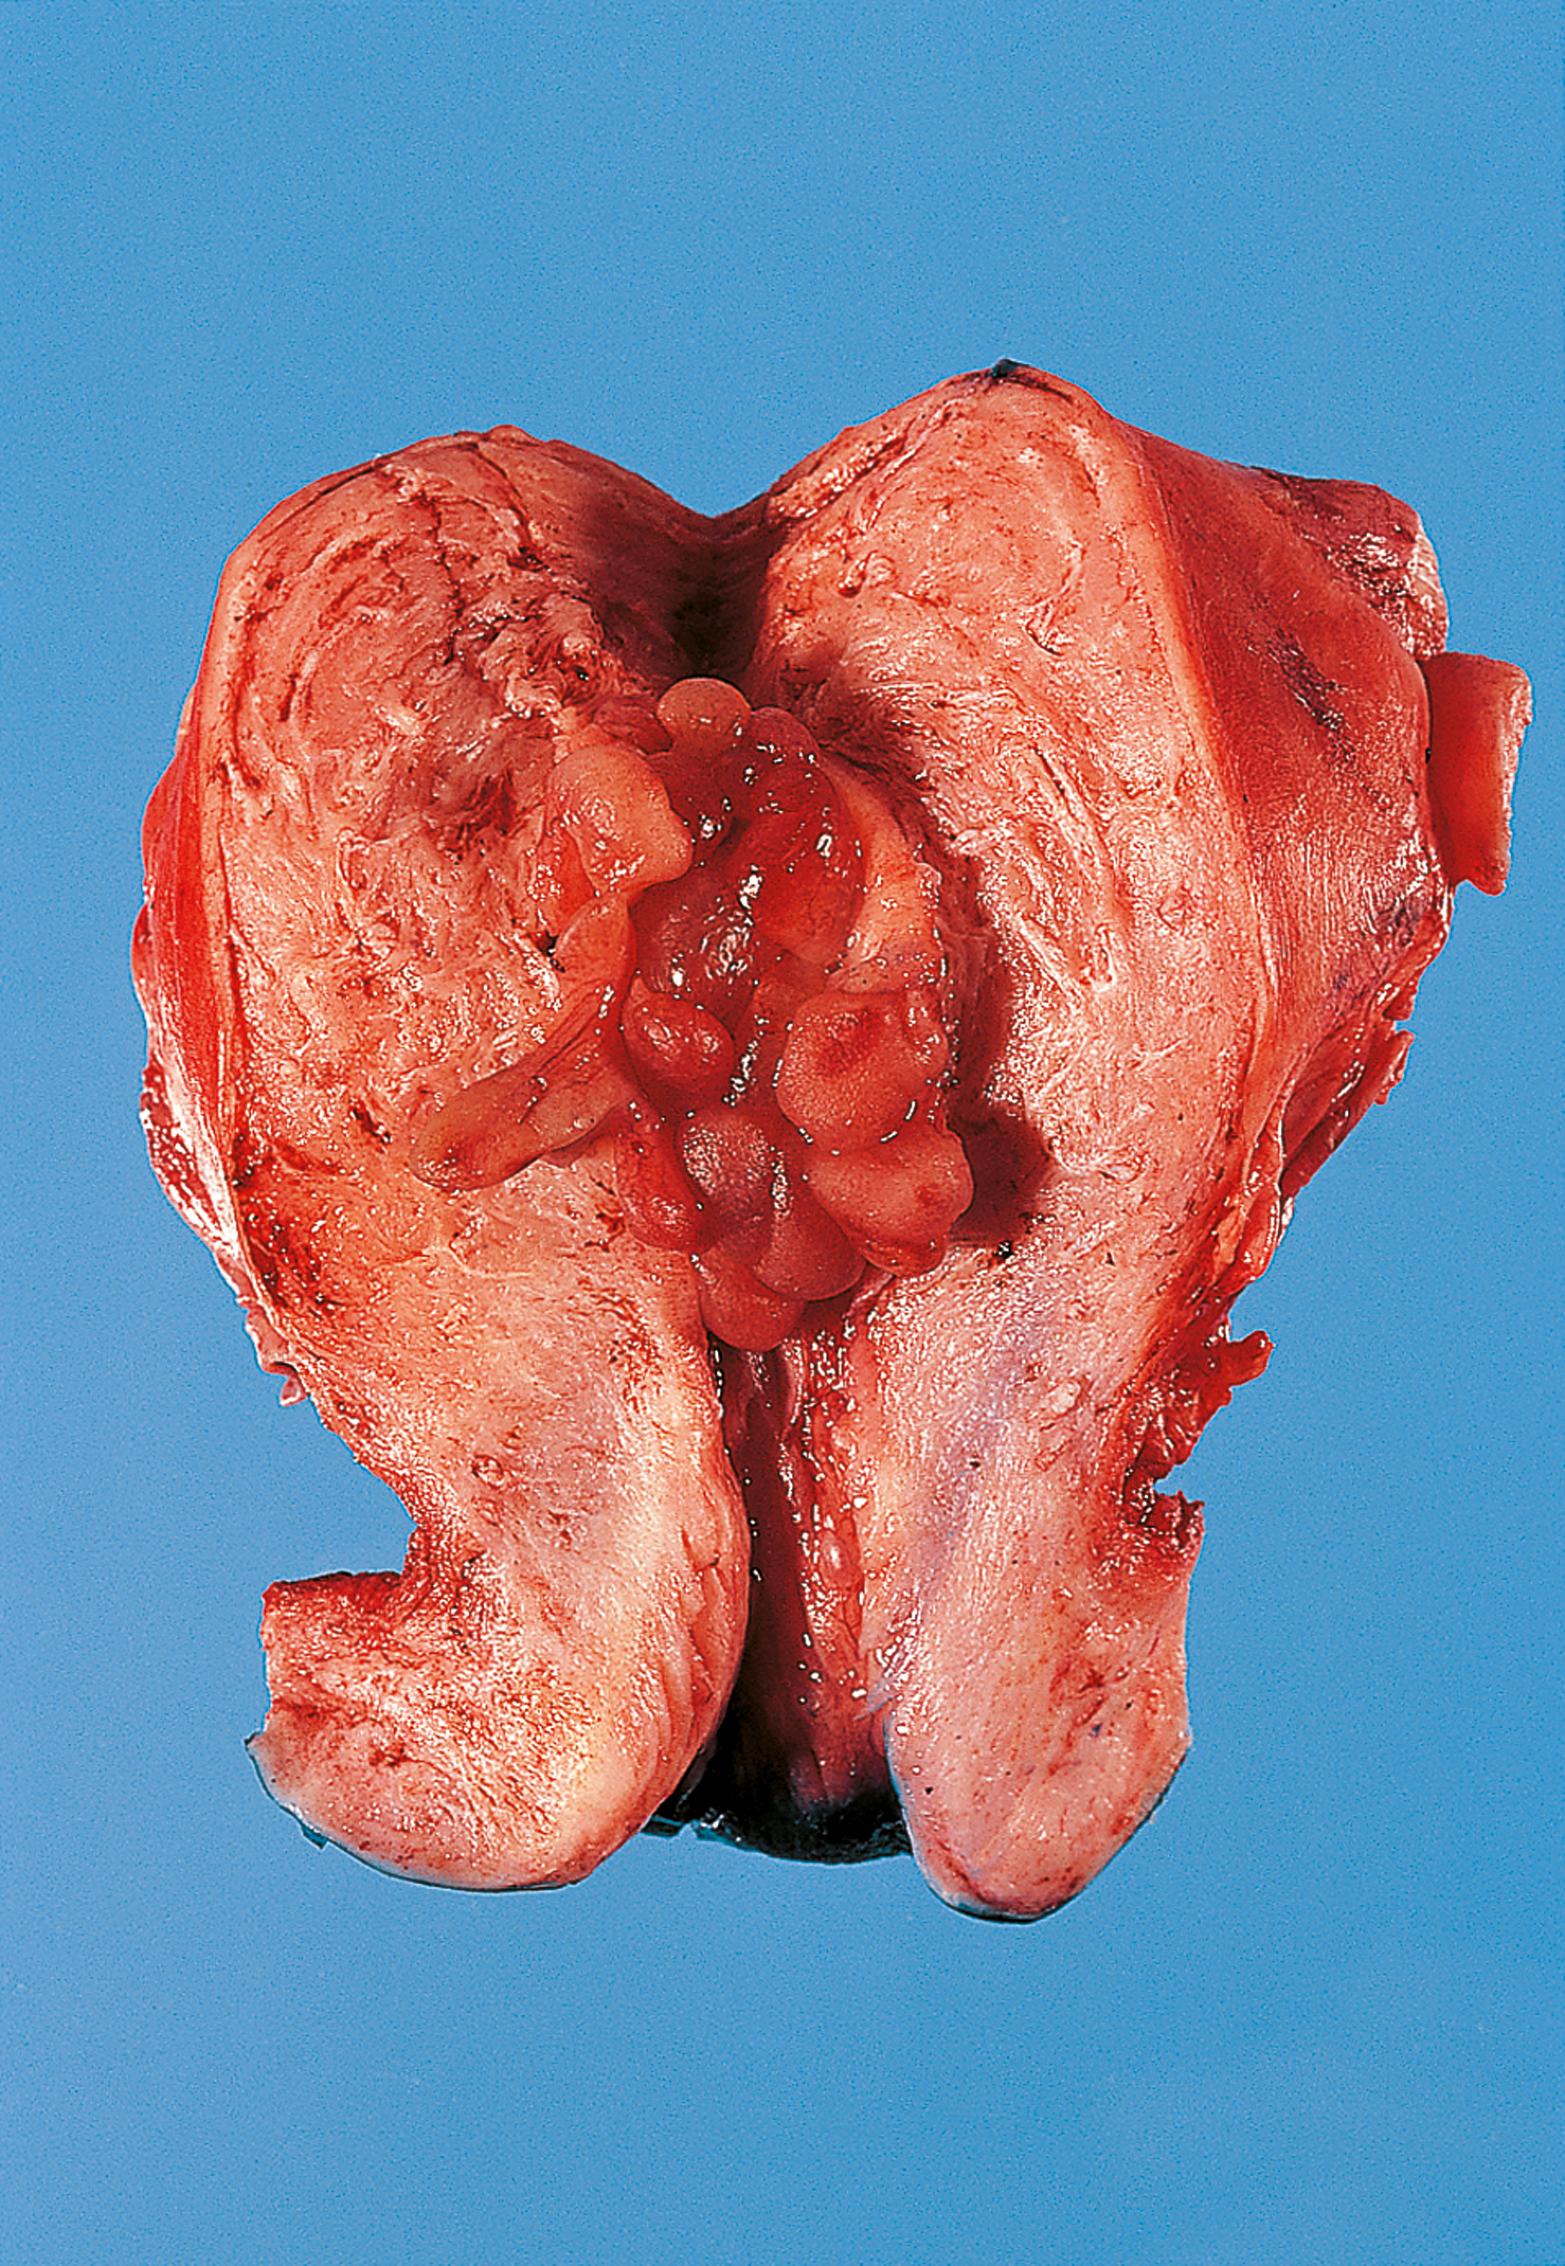 E-Fig. 6.1 G, Endometrial hyperplasia. The whole lining of the endometrial cavity appears polypoid due to excessive oestrogenic stimulation. As a result, patients often present with menorrhagia (heavy menstruation) or post menopausal bleeding.